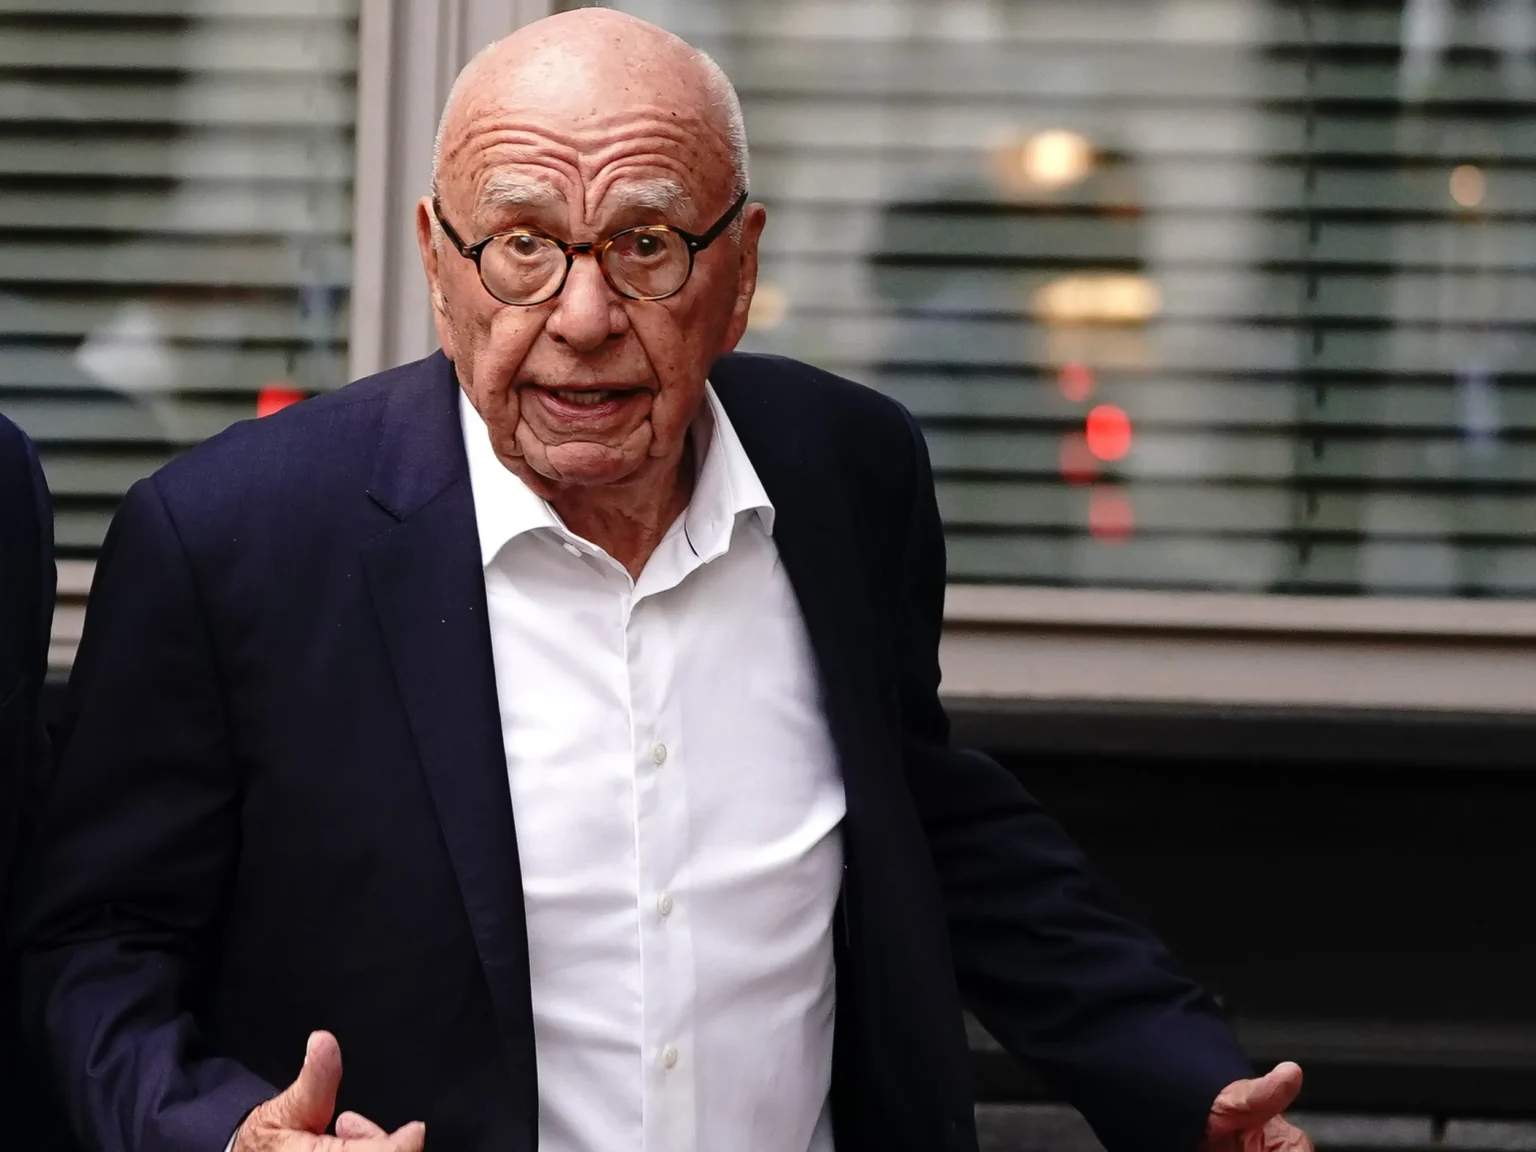 Rupert Murdoch, 92, engaged for second time in a year to new partner Elena Zhukova, 67